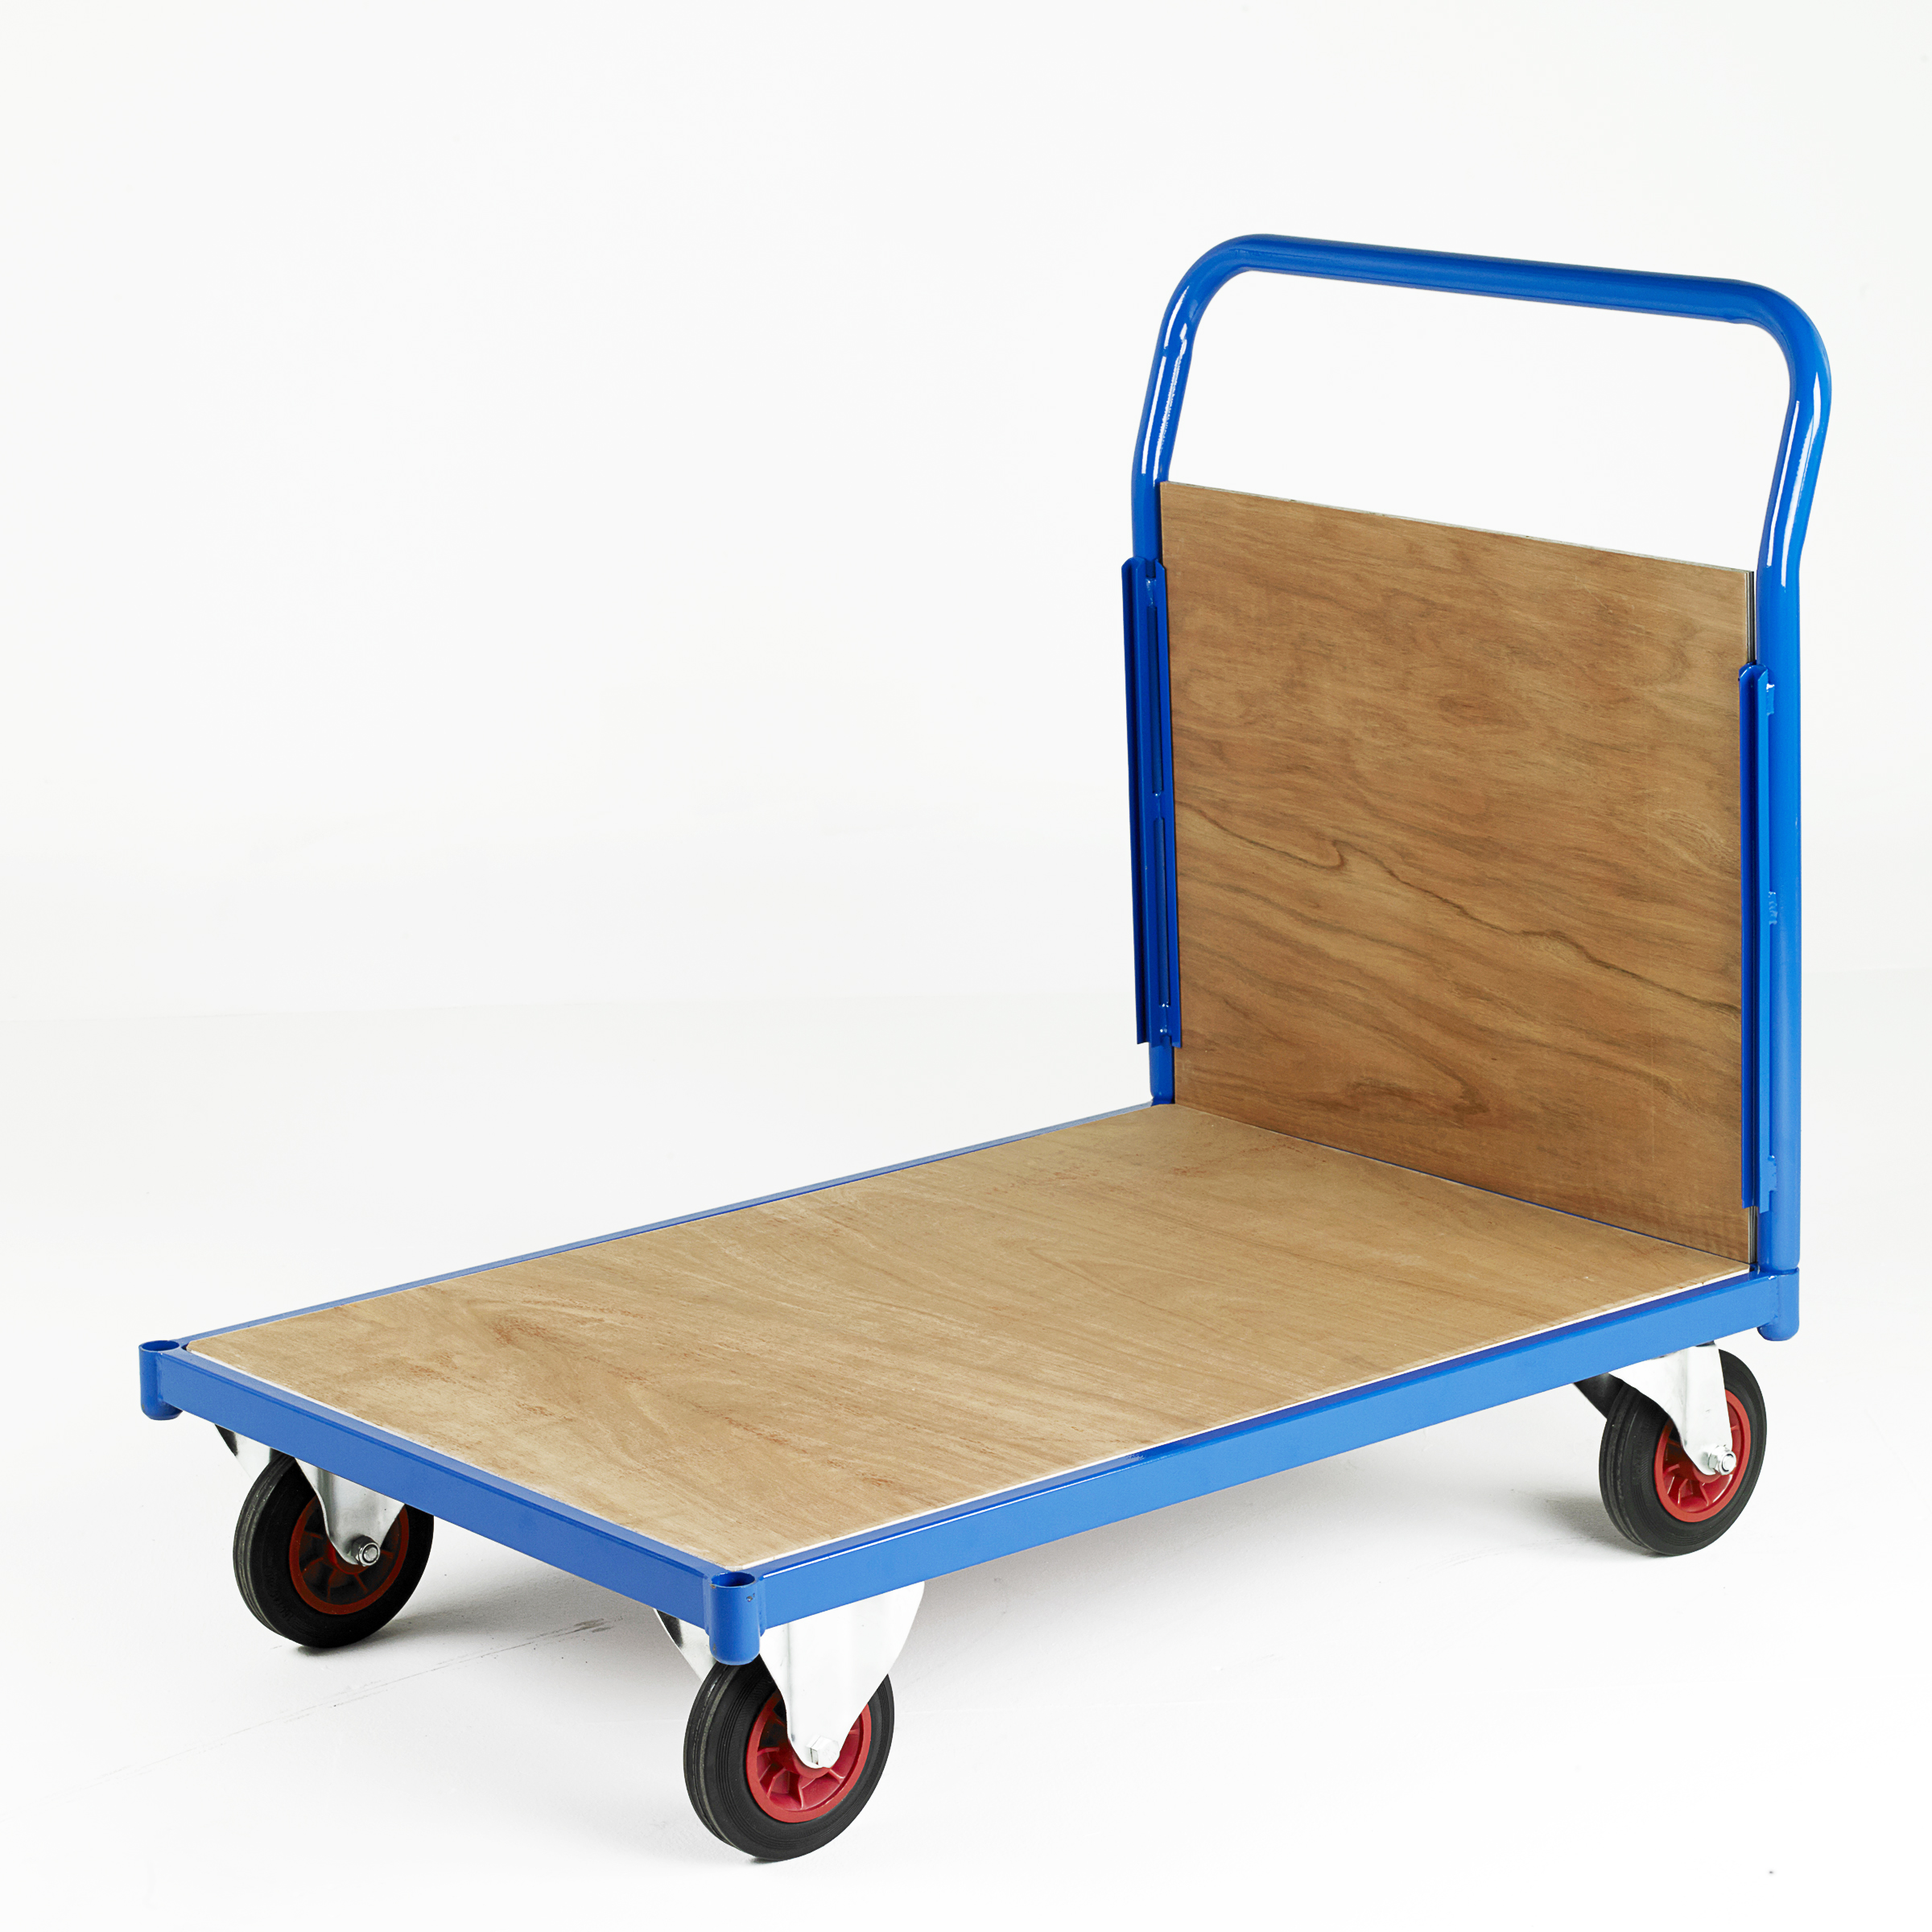 Platform Truck - 500 Series with Timber Panels